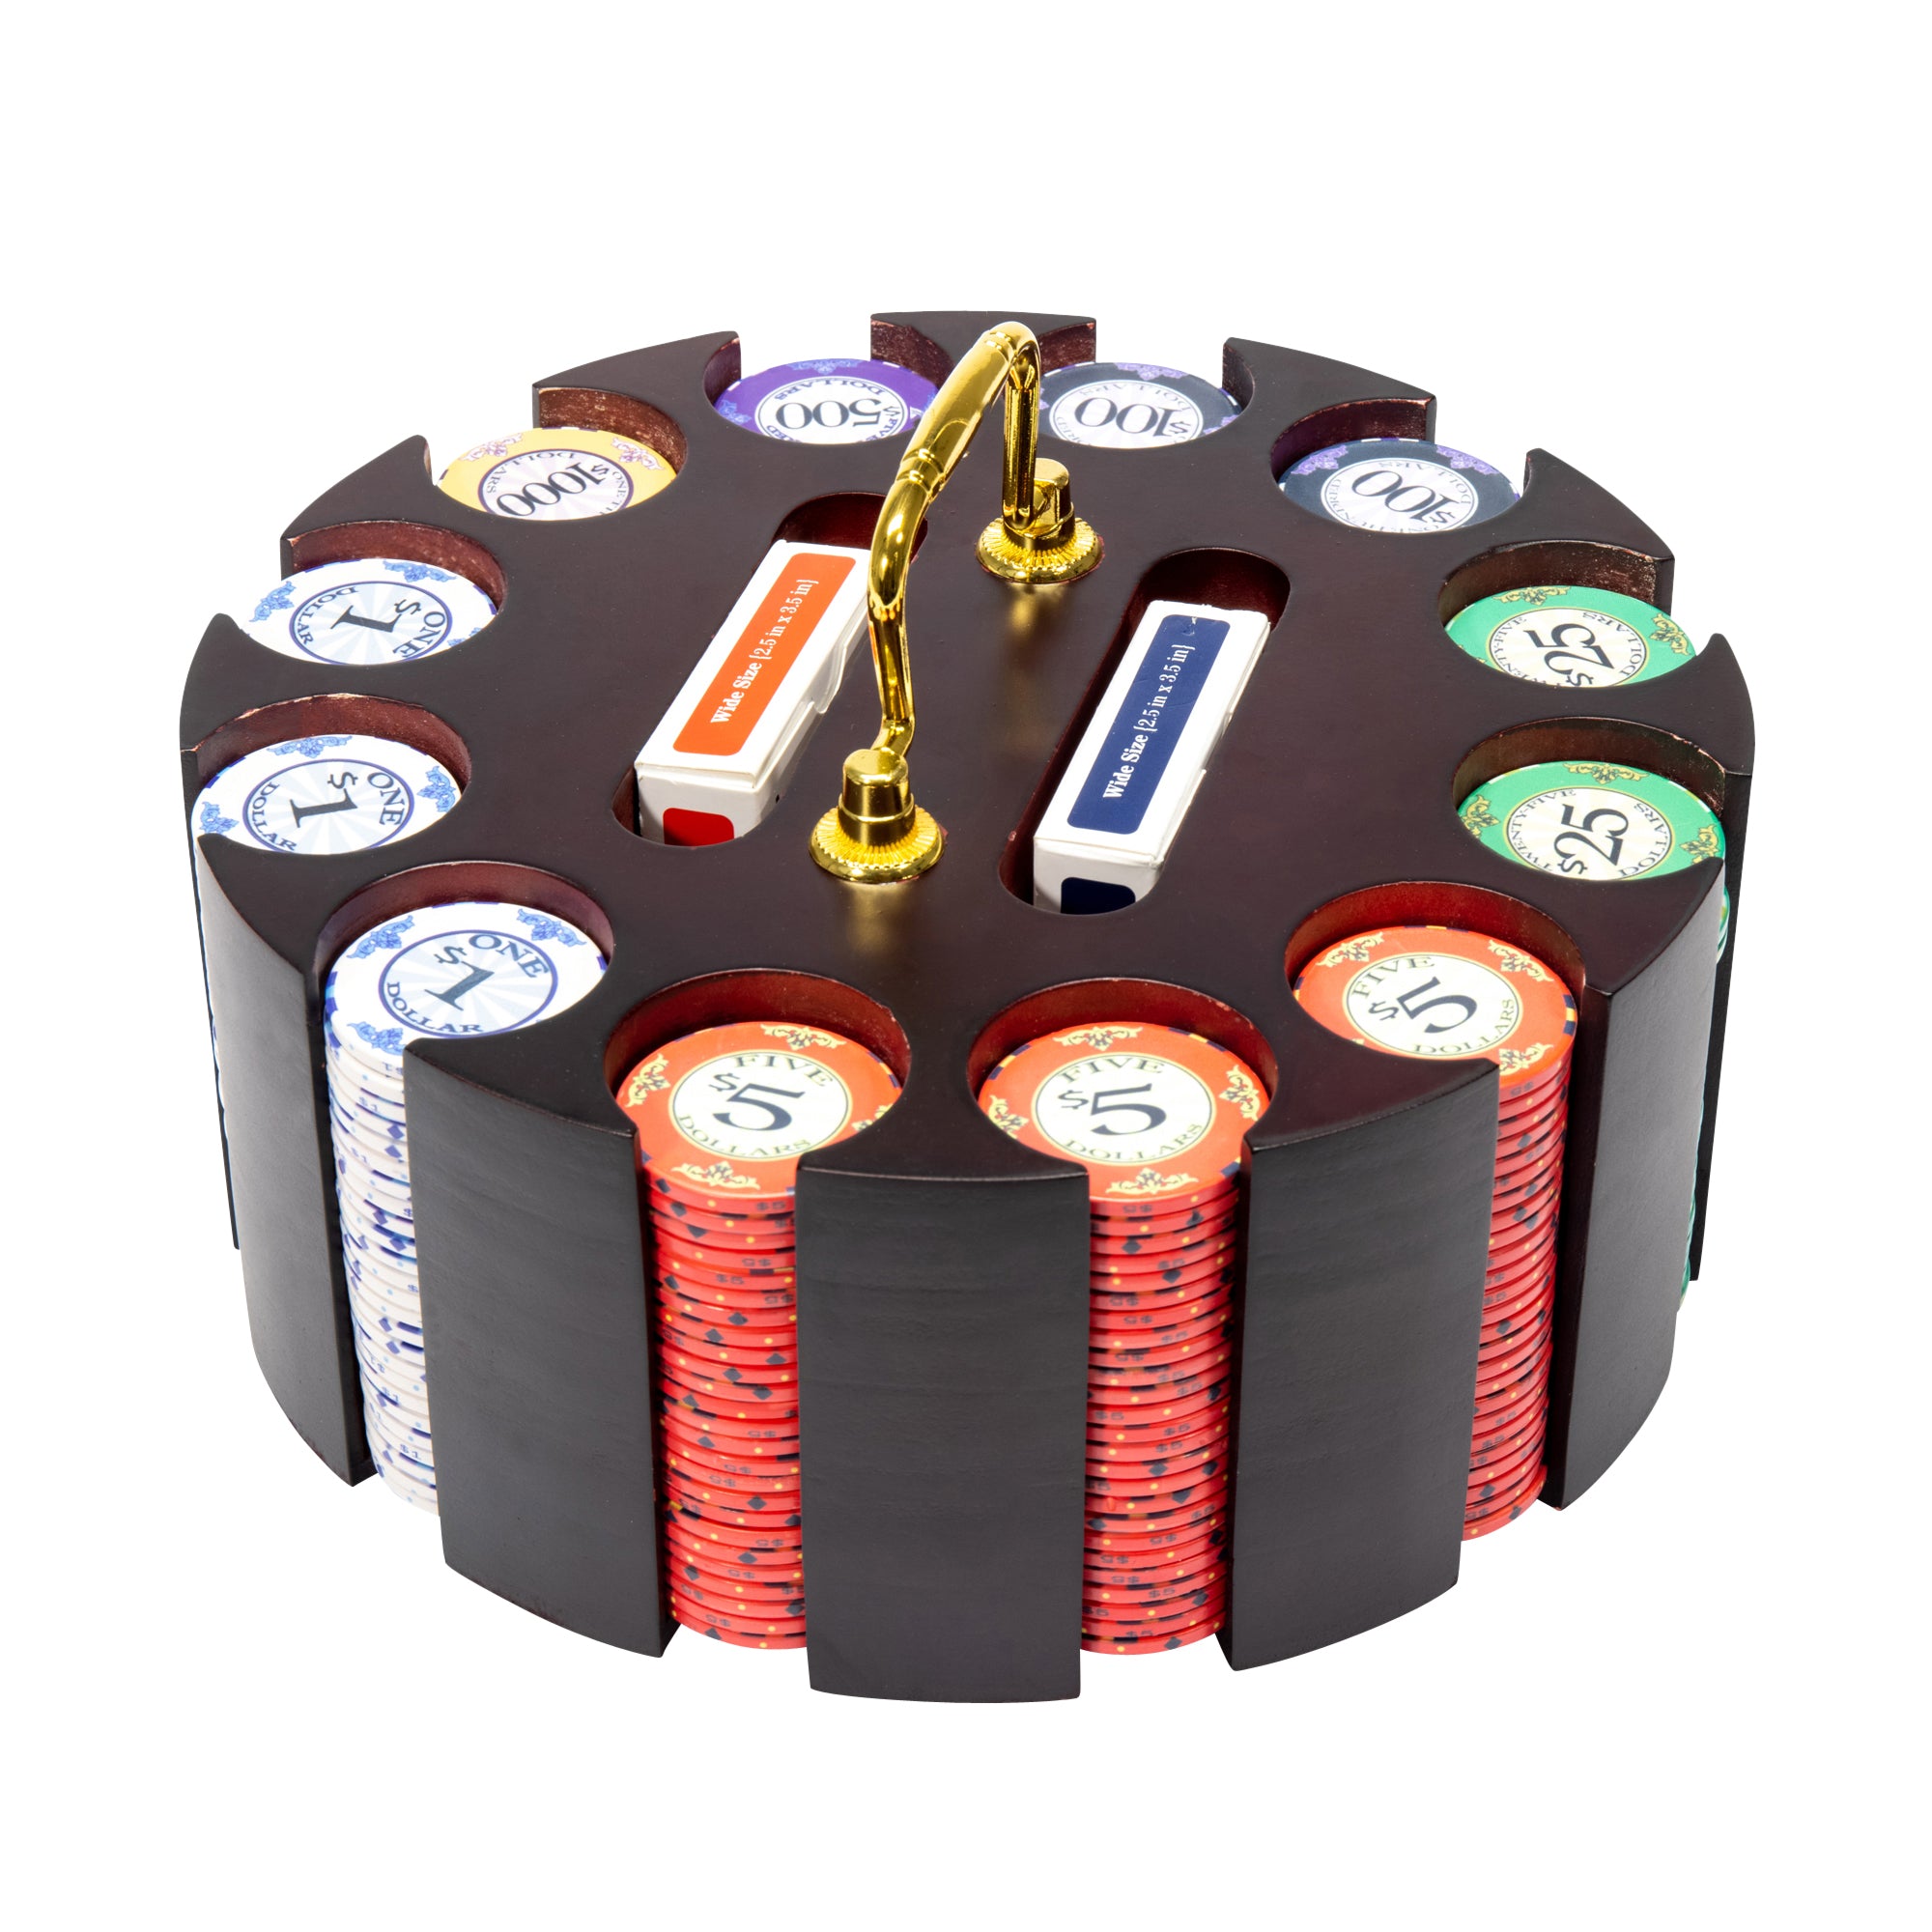 Scroll 10-gram Ceramic Poker Chip in Wood Carousel (300 Count) - All Over Print